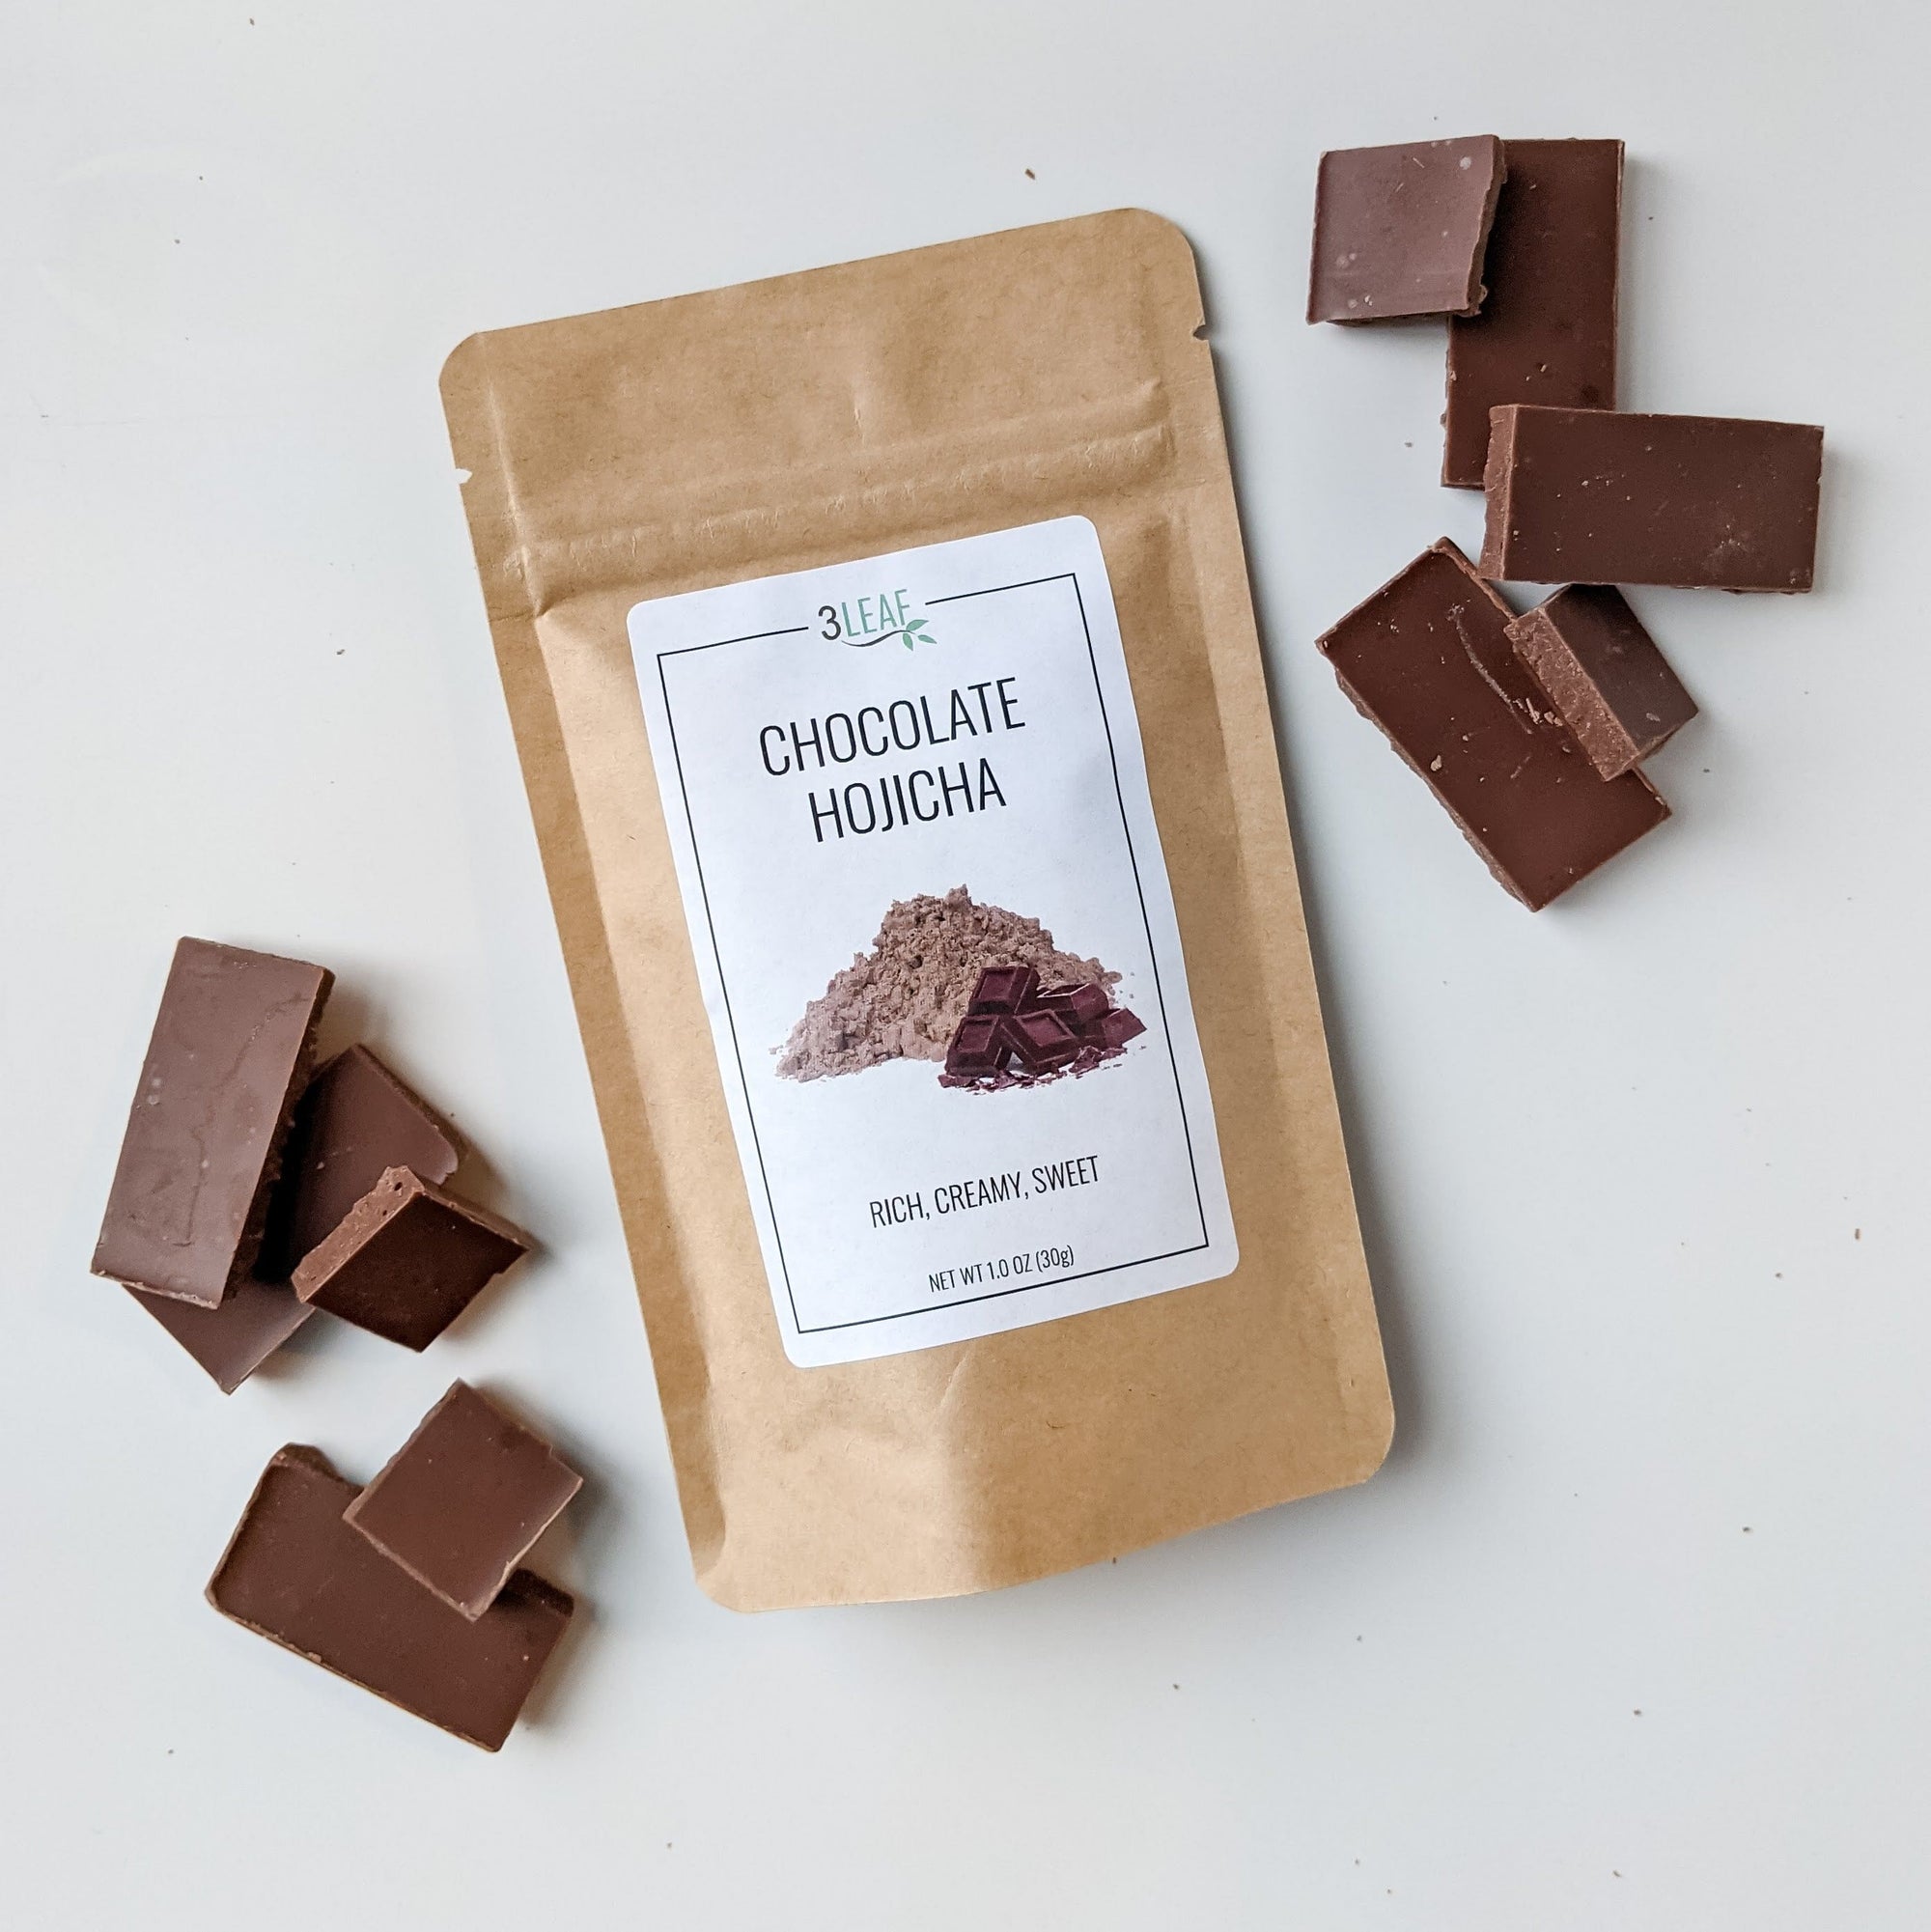 Chocolate Hojicha Bag surrounded by pieces of chocolate